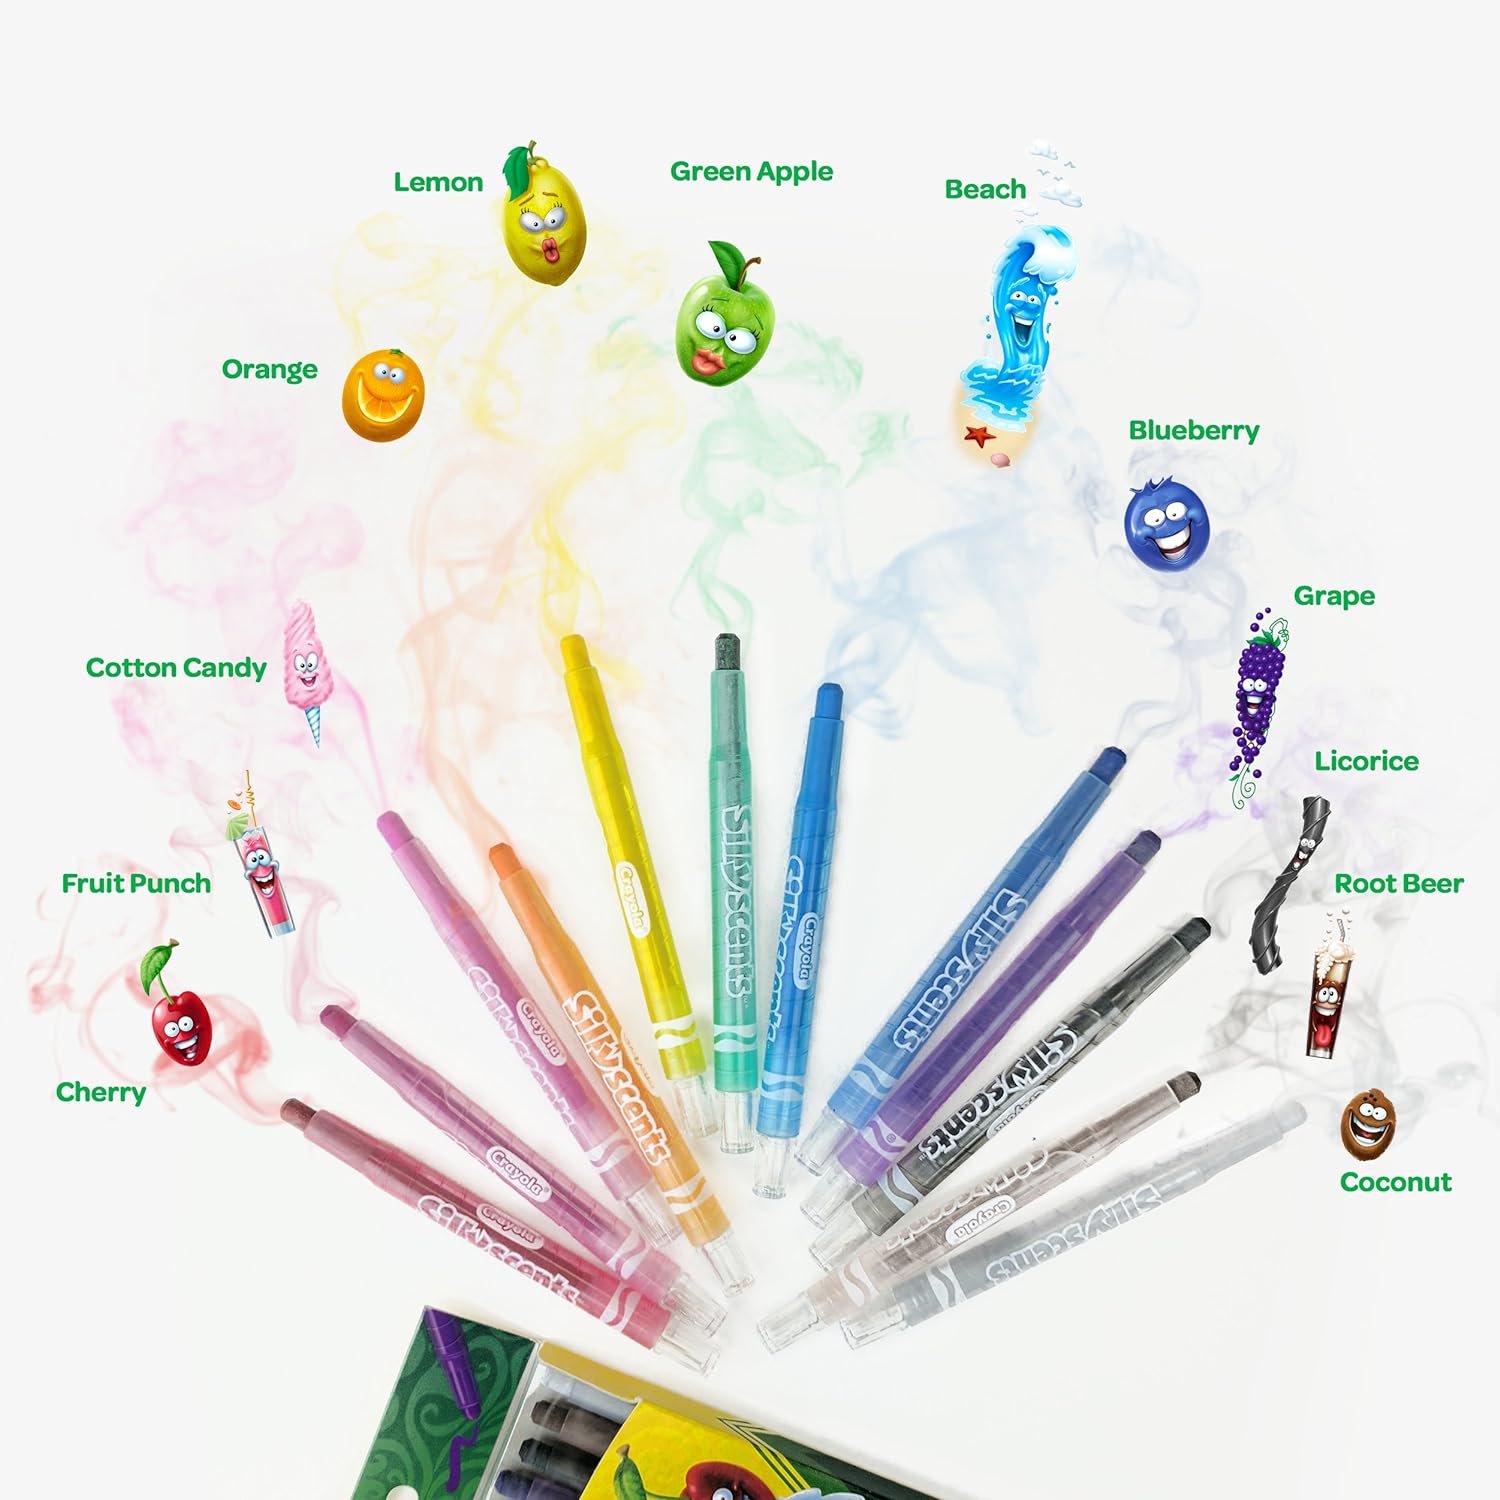 Crayola Silly Scents Twistable Crayons 12 Set :: Art Stop